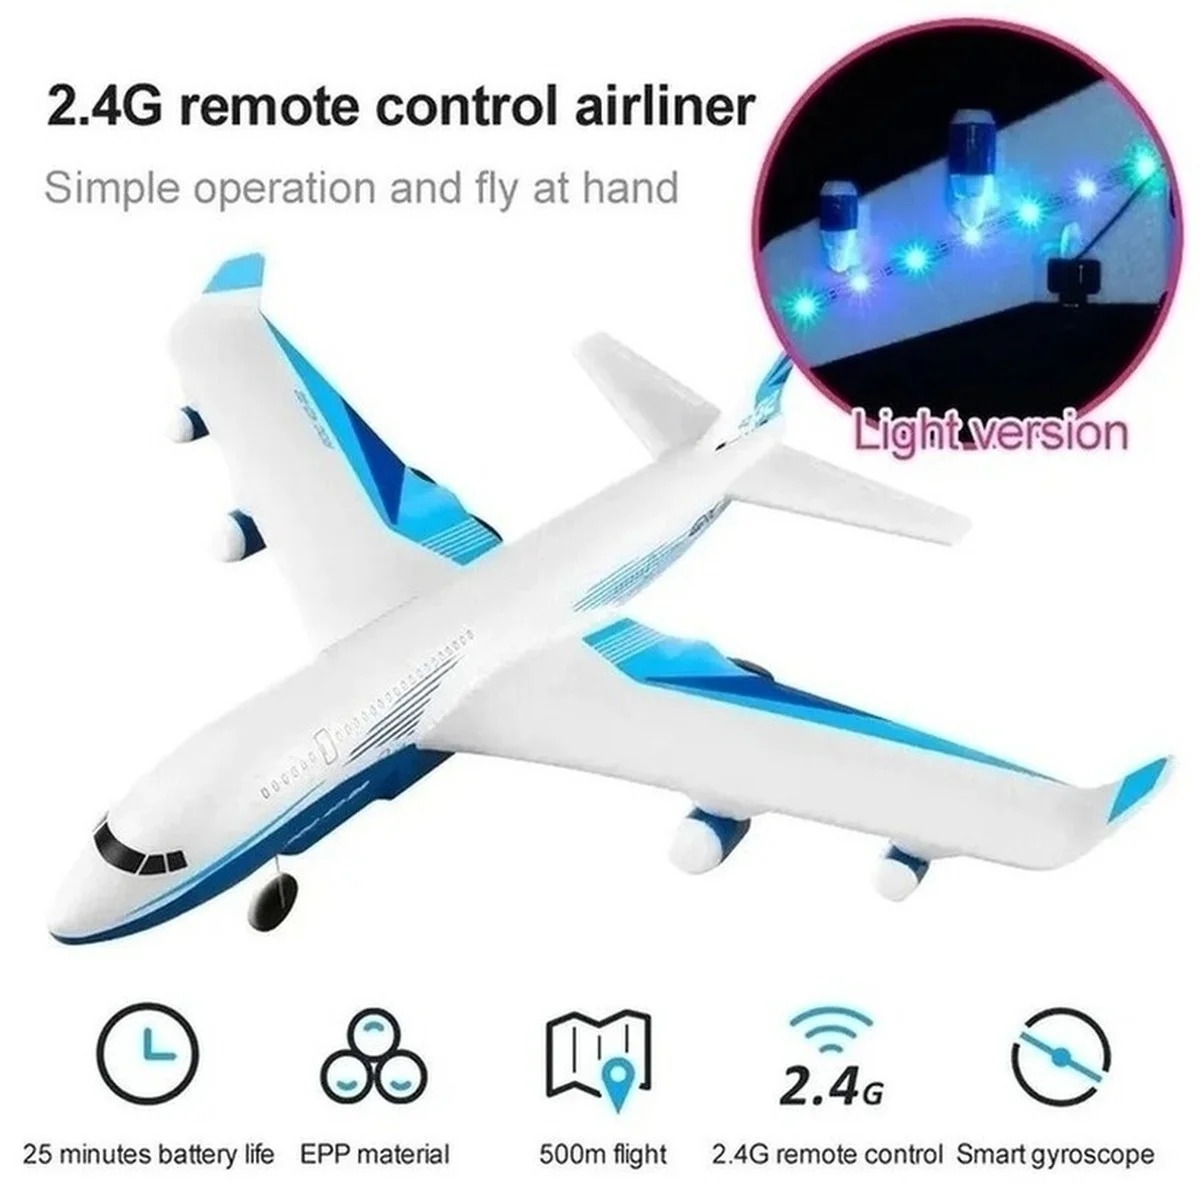 

Newest Children Hand Throw RC Plane Airliner G2 Airbus Drone Glider 2.4G Radio Remote Control Airplane Outdoor Toys for Boys